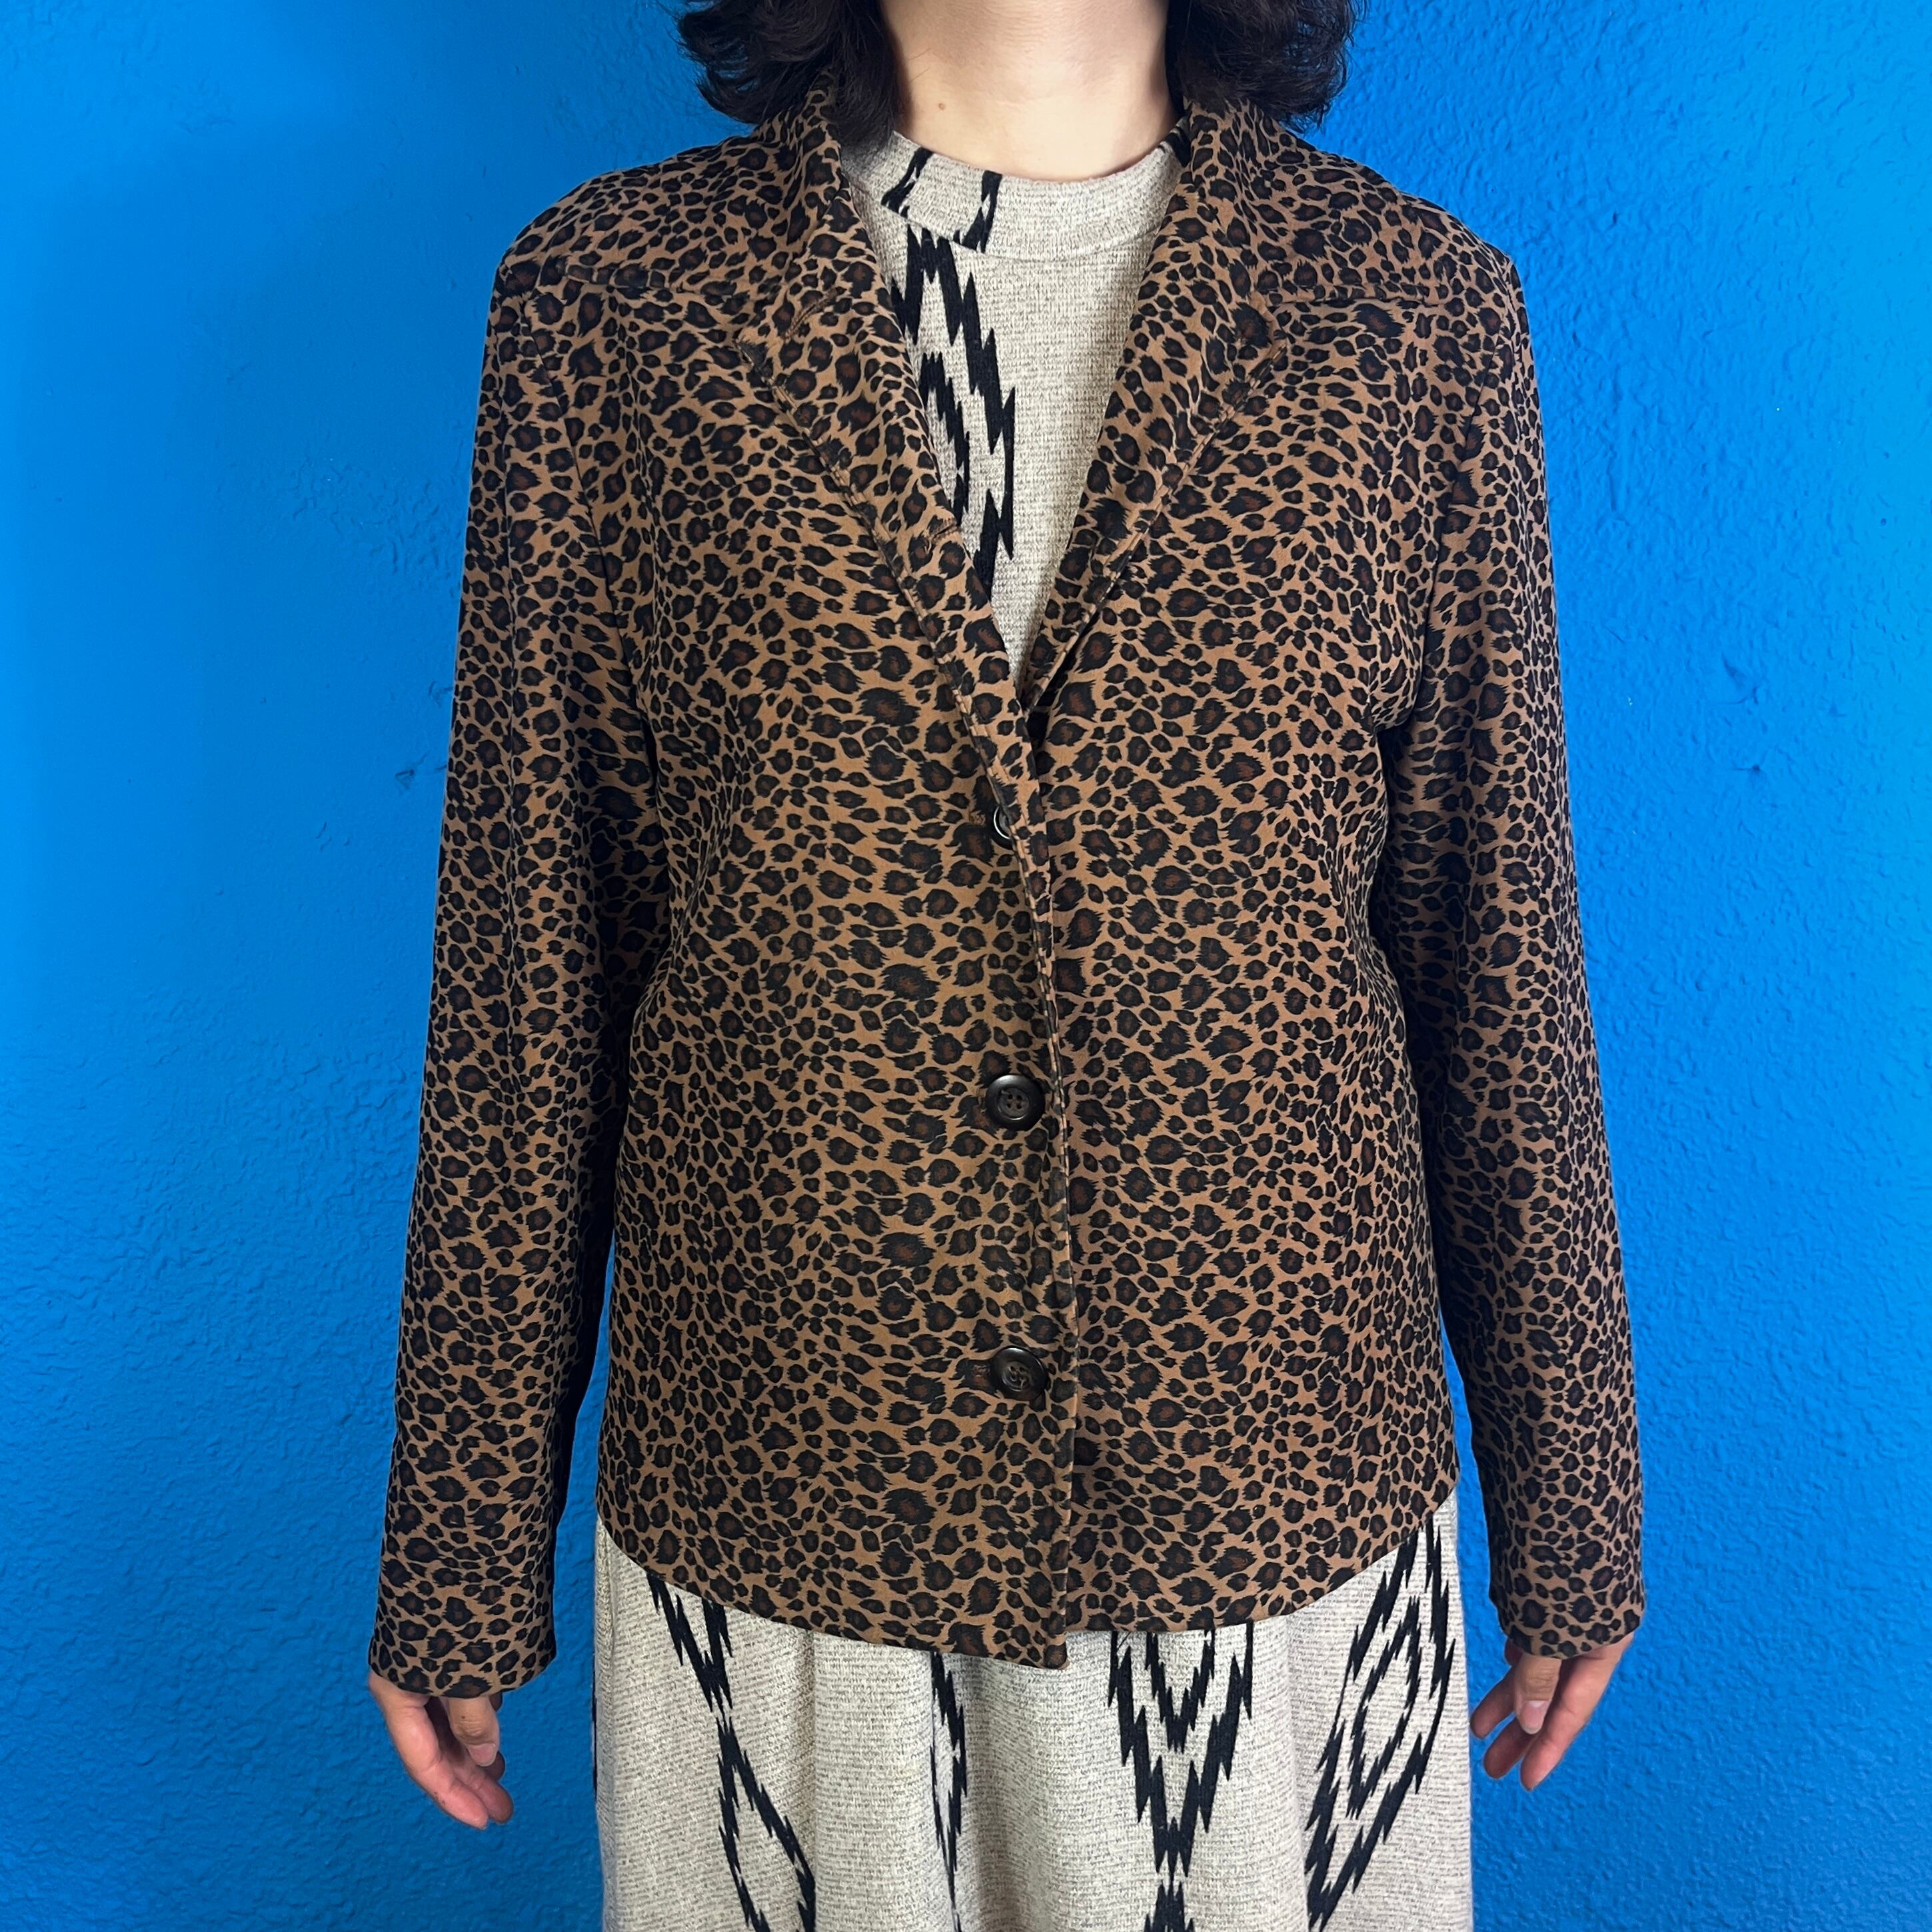 Lady's】 90s Leopard Print Jacket / Made In USA レオパード ヒョウ